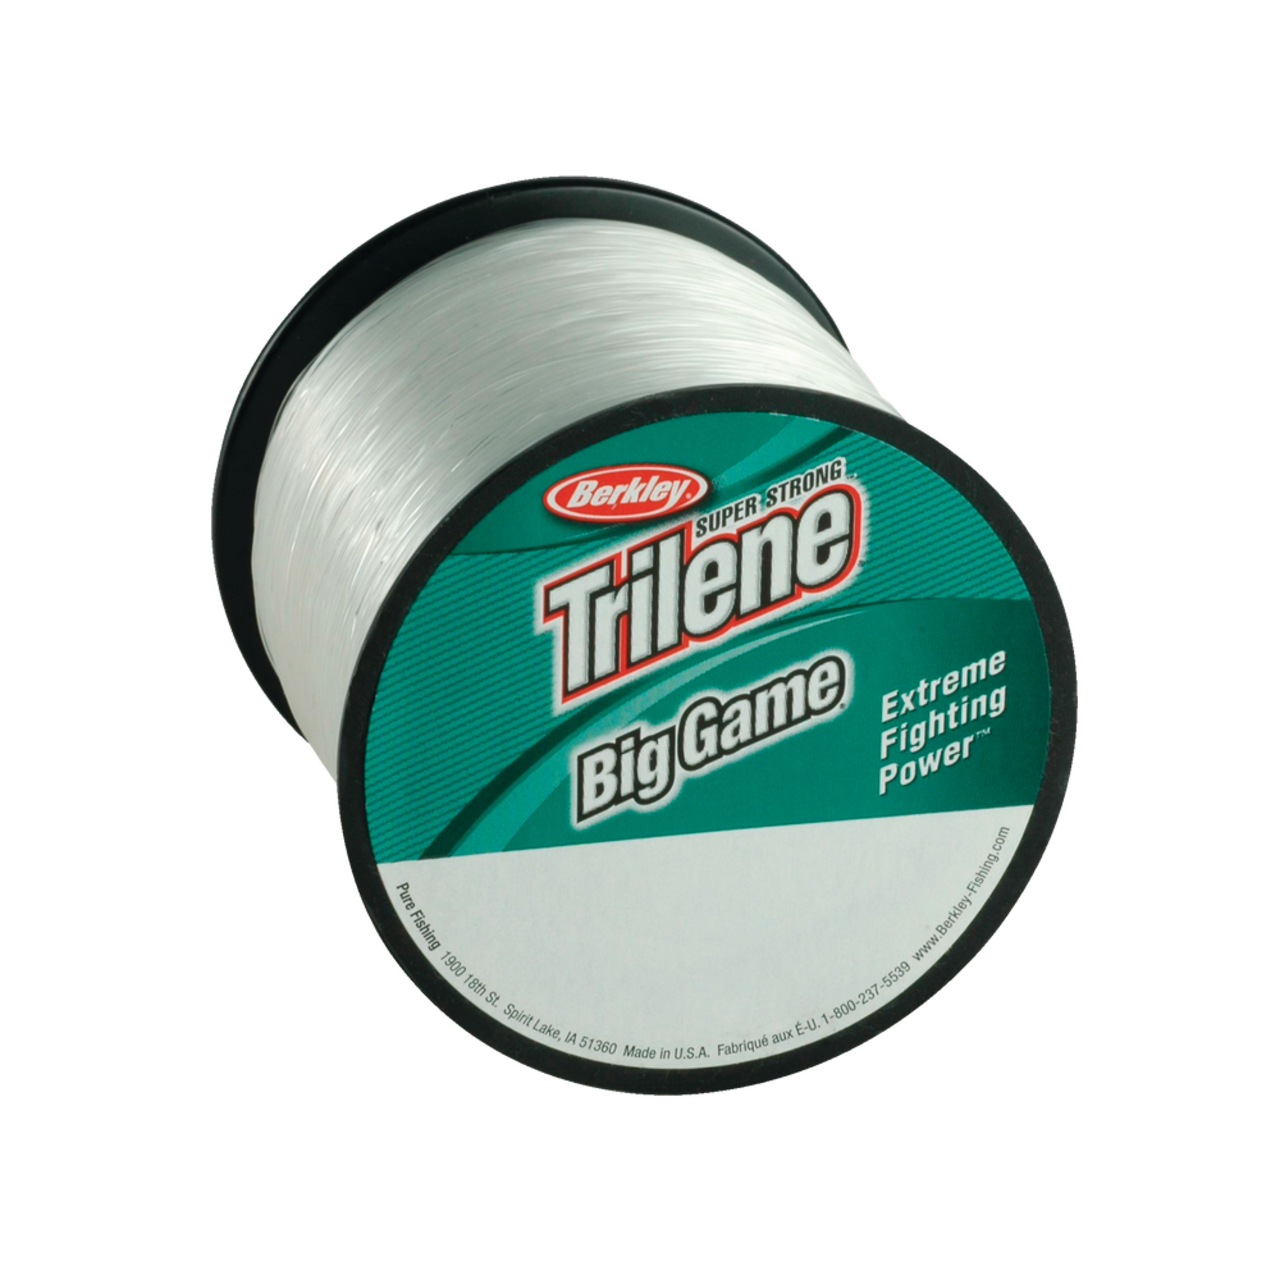 https://media-www.canadiantire.ca/product/playing/fishing/fishing-accessories/0774001/berkley-trilene-big-game-mono-clear-8lb-1700-yards-ebbff741-fda5-4837-a647-5e5e3a4c6506.png?imdensity=1&imwidth=1244&impolicy=mZoom